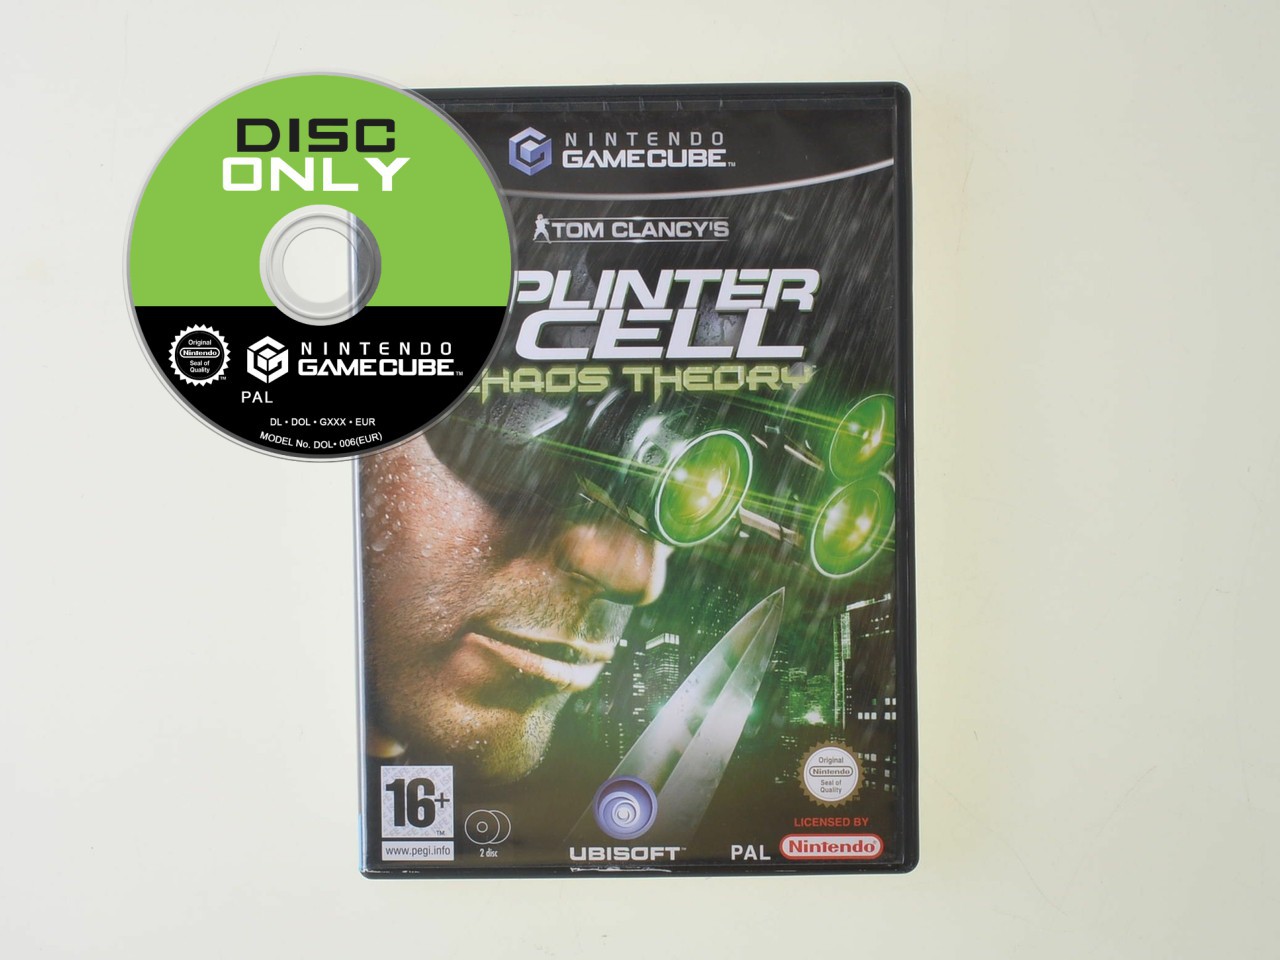 Tom Clancy's Splinter Cell Chaos Theory - Disc Only - Gamecube Games